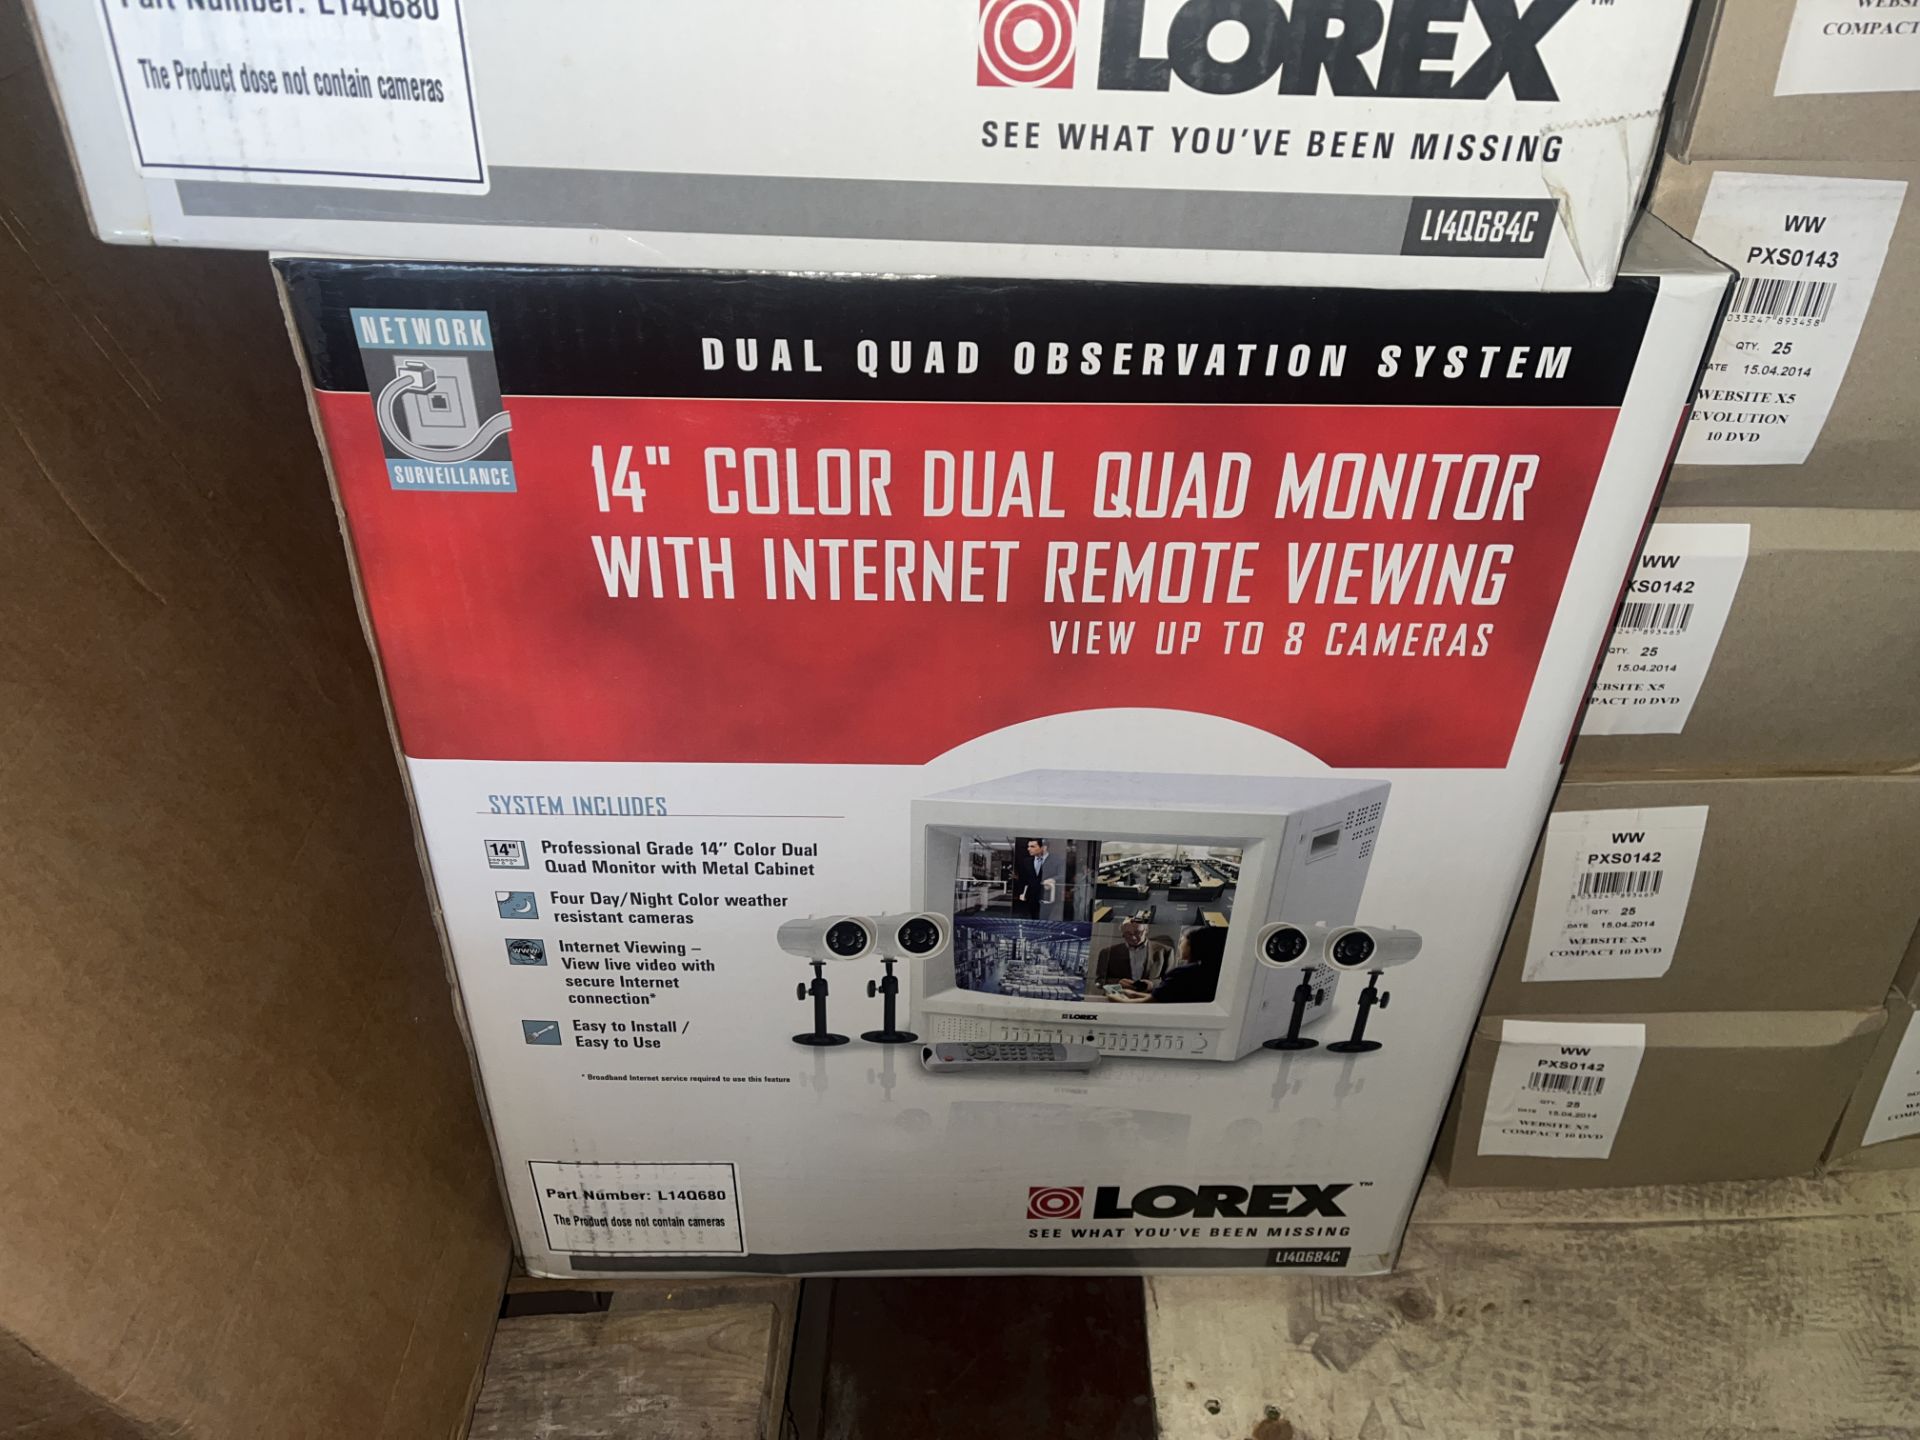 BRAND NEW LOREX L14Q684C 14 INCH COLOUR DUAL QUAD MONITOR WITH INTERNET REMOTE VIEWING VIEW UPTO 8